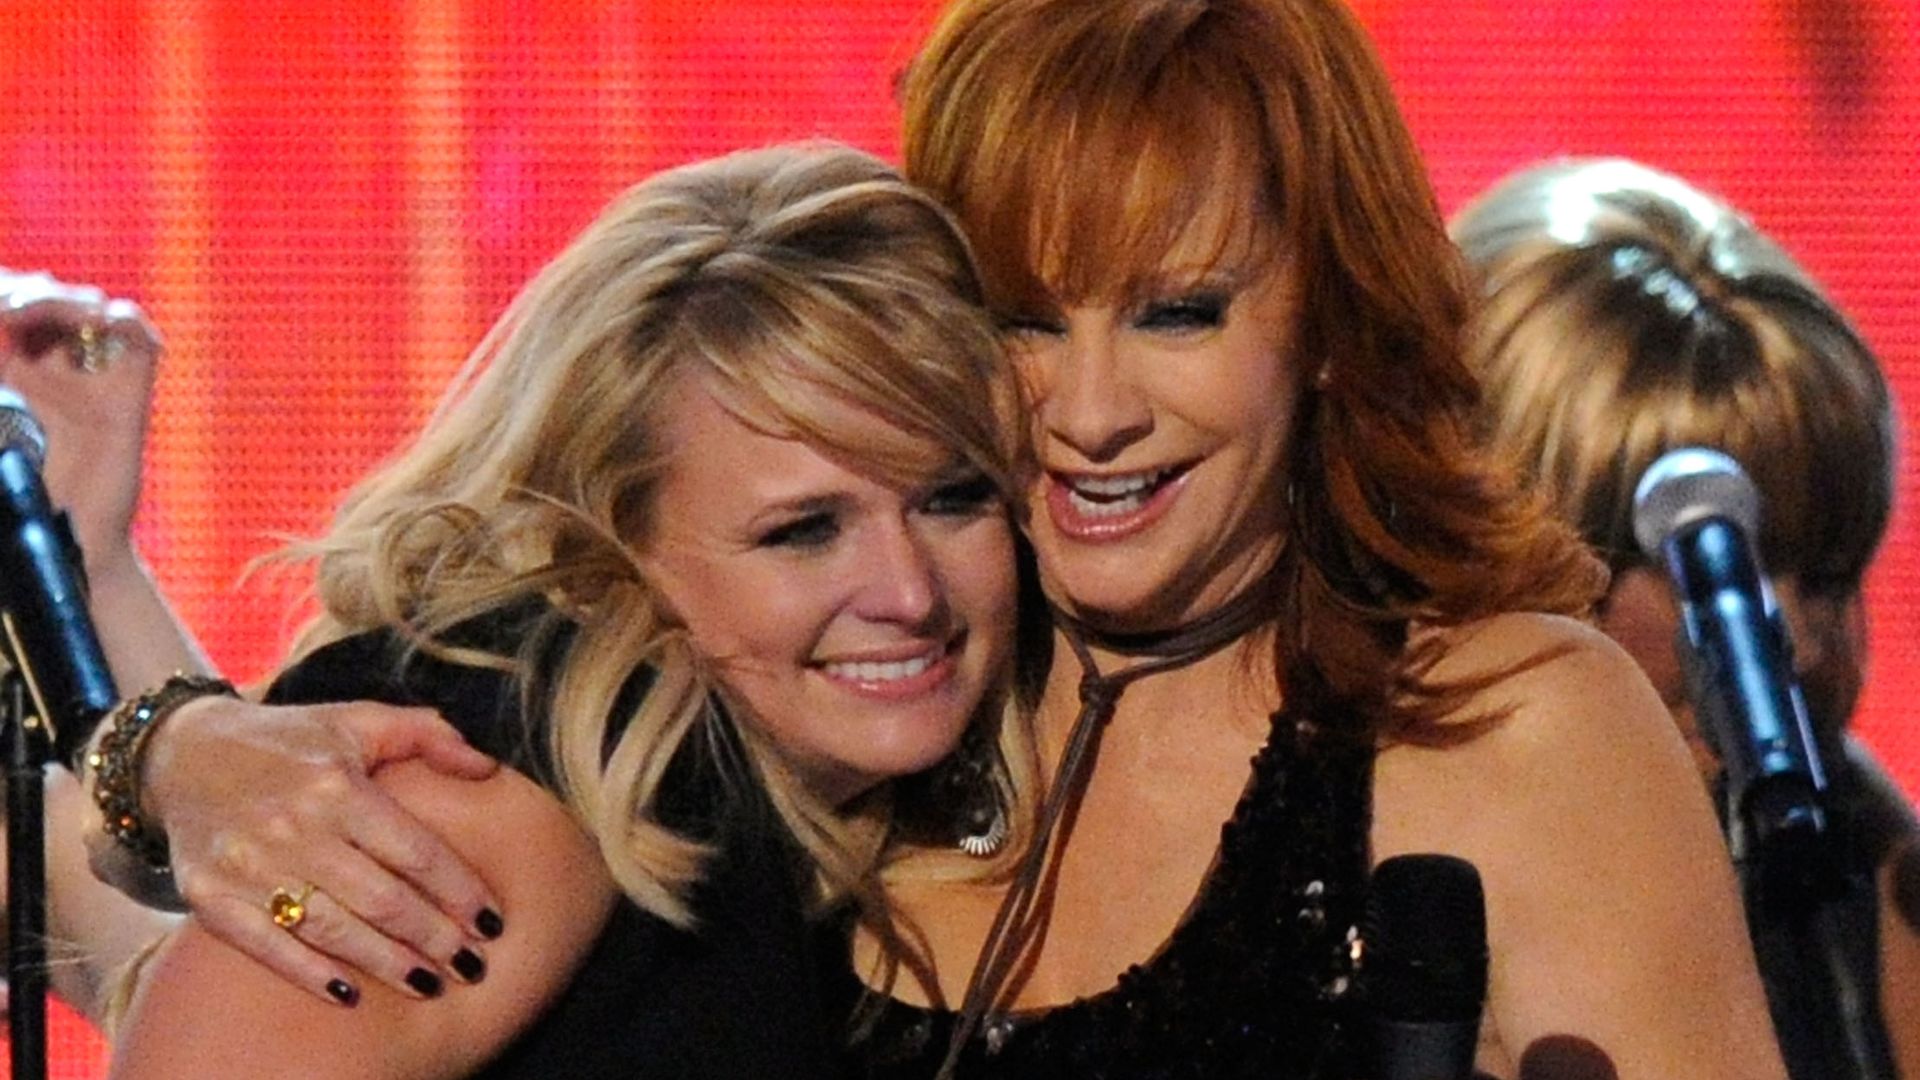 Miranda Lambert and Reba McEntire perform onstage during Brooks & Dunn's The Last Rodeo Show in 2010